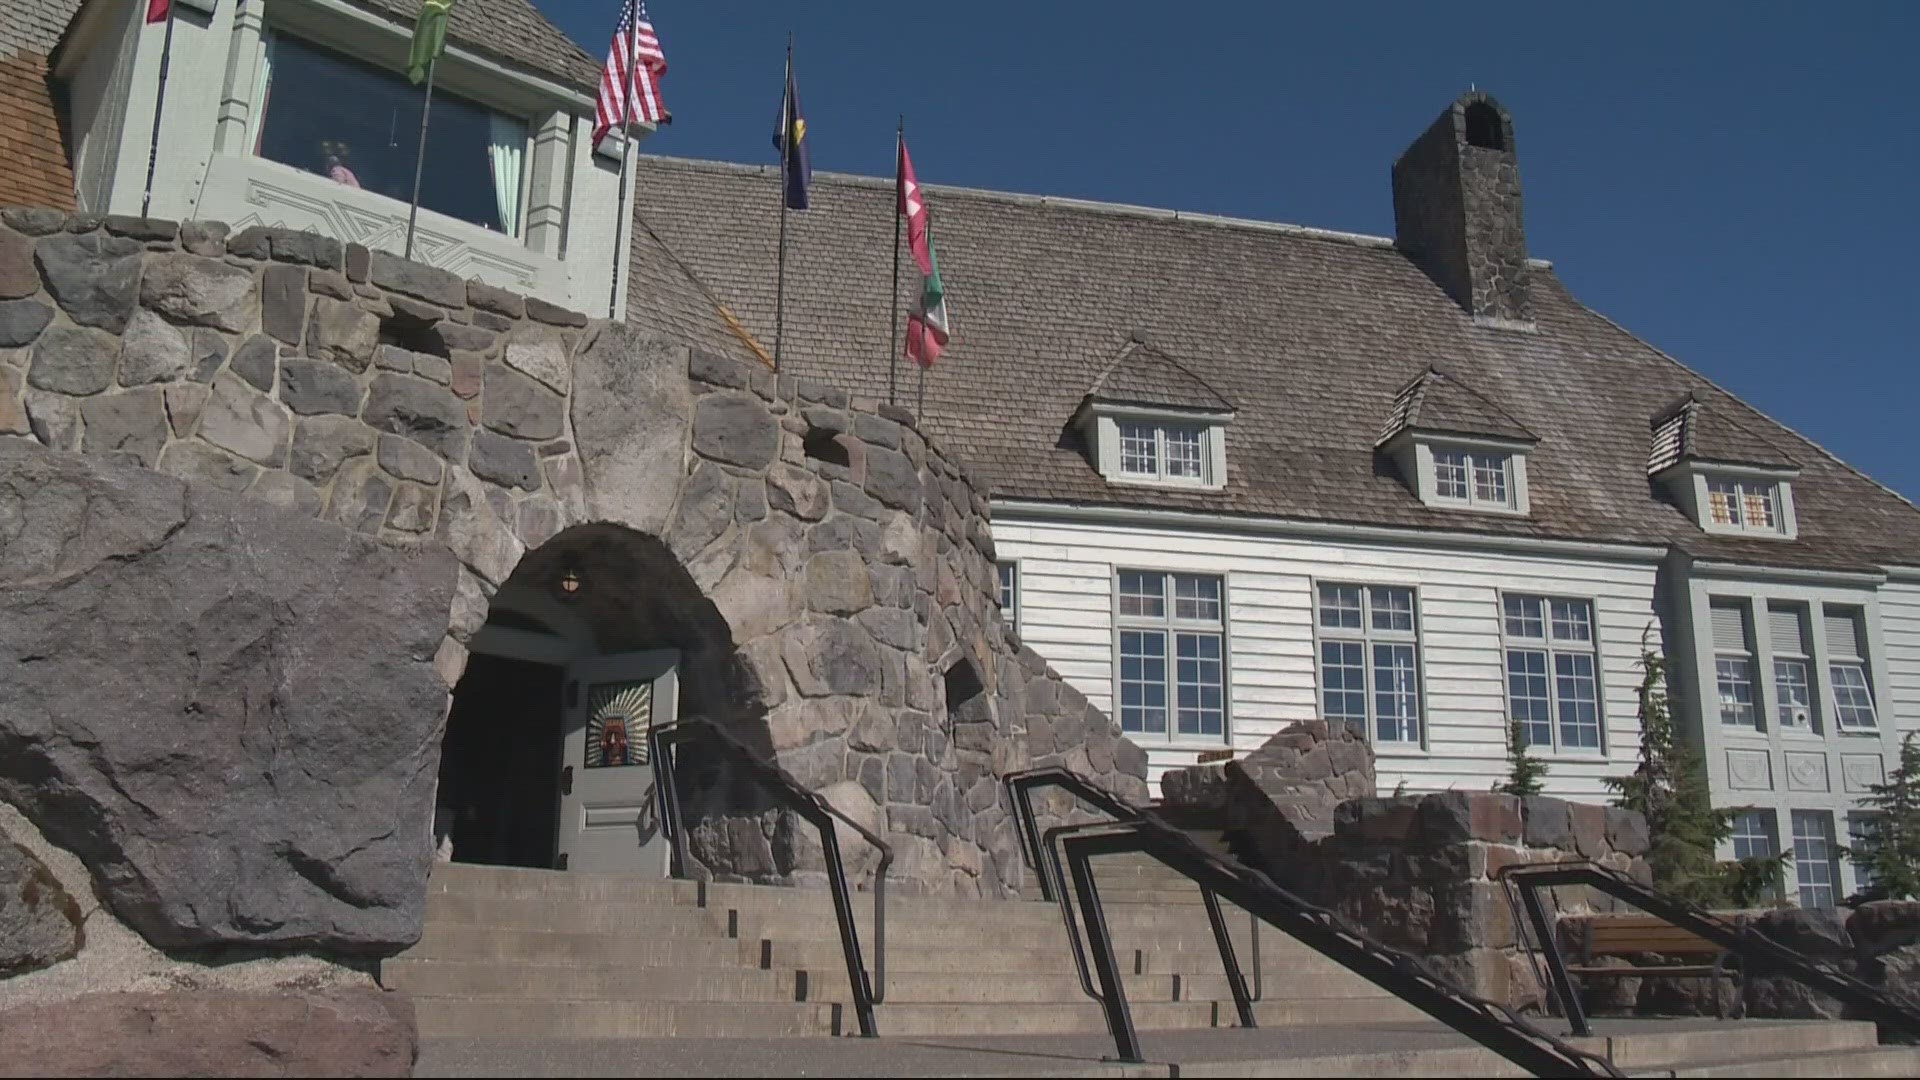 The music, beer and bike festival at Timberline Lodge this weekend will benefit Doernbecher Children’s Hospital.